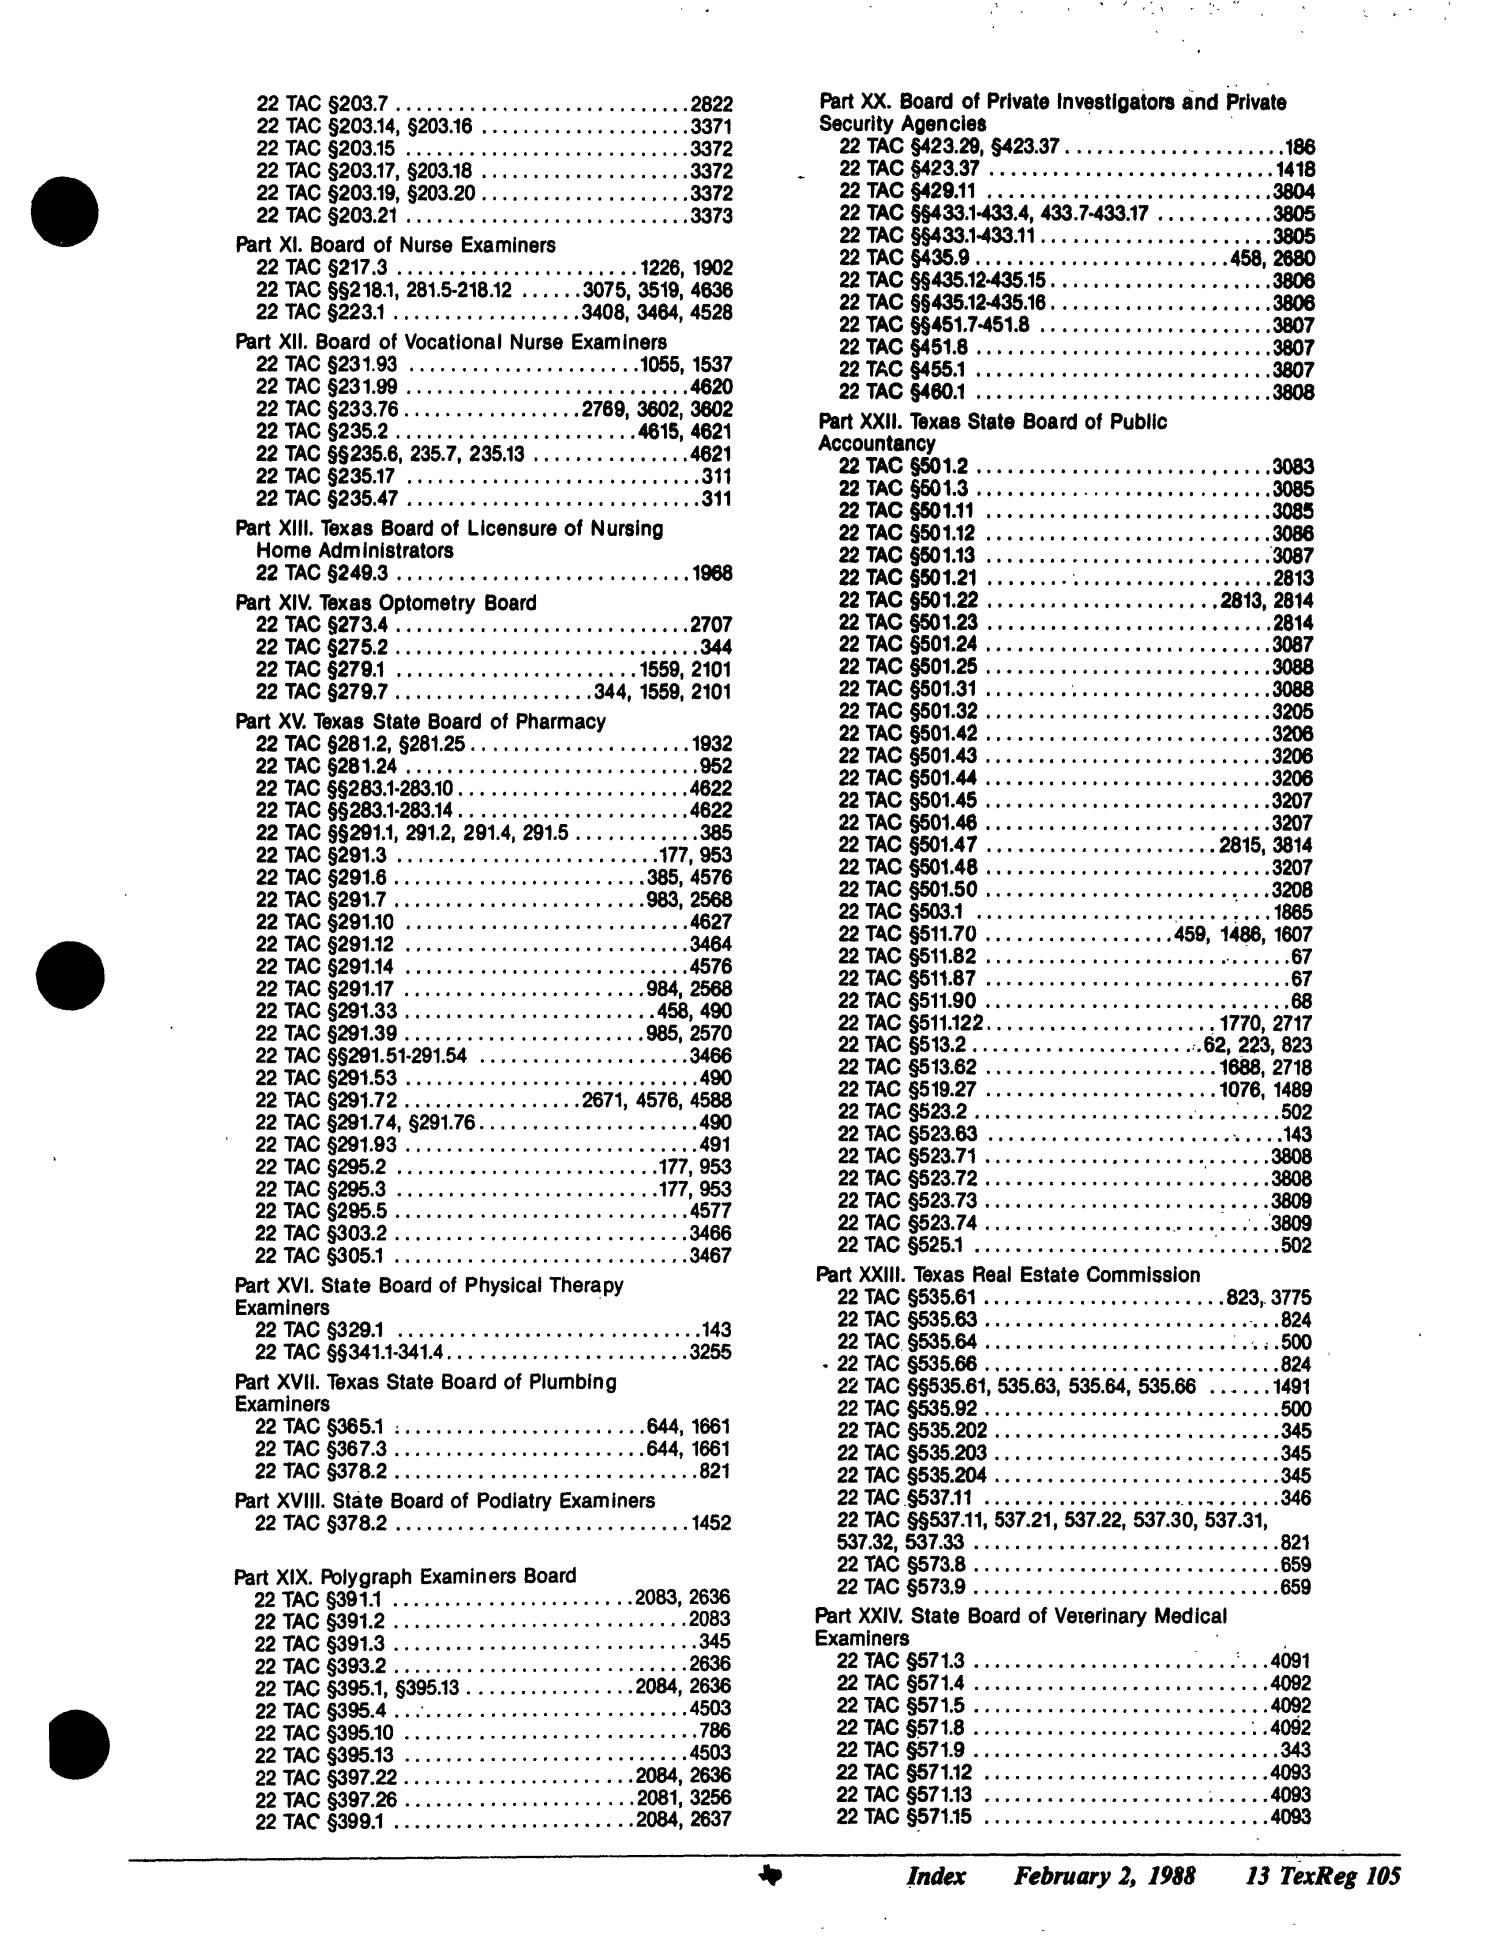 Texas Register: Annual Index January - December 1988, Volume 13 Numbers [1-96] - pages 225-350, February 3, 1989
                                                
                                                    105
                                                